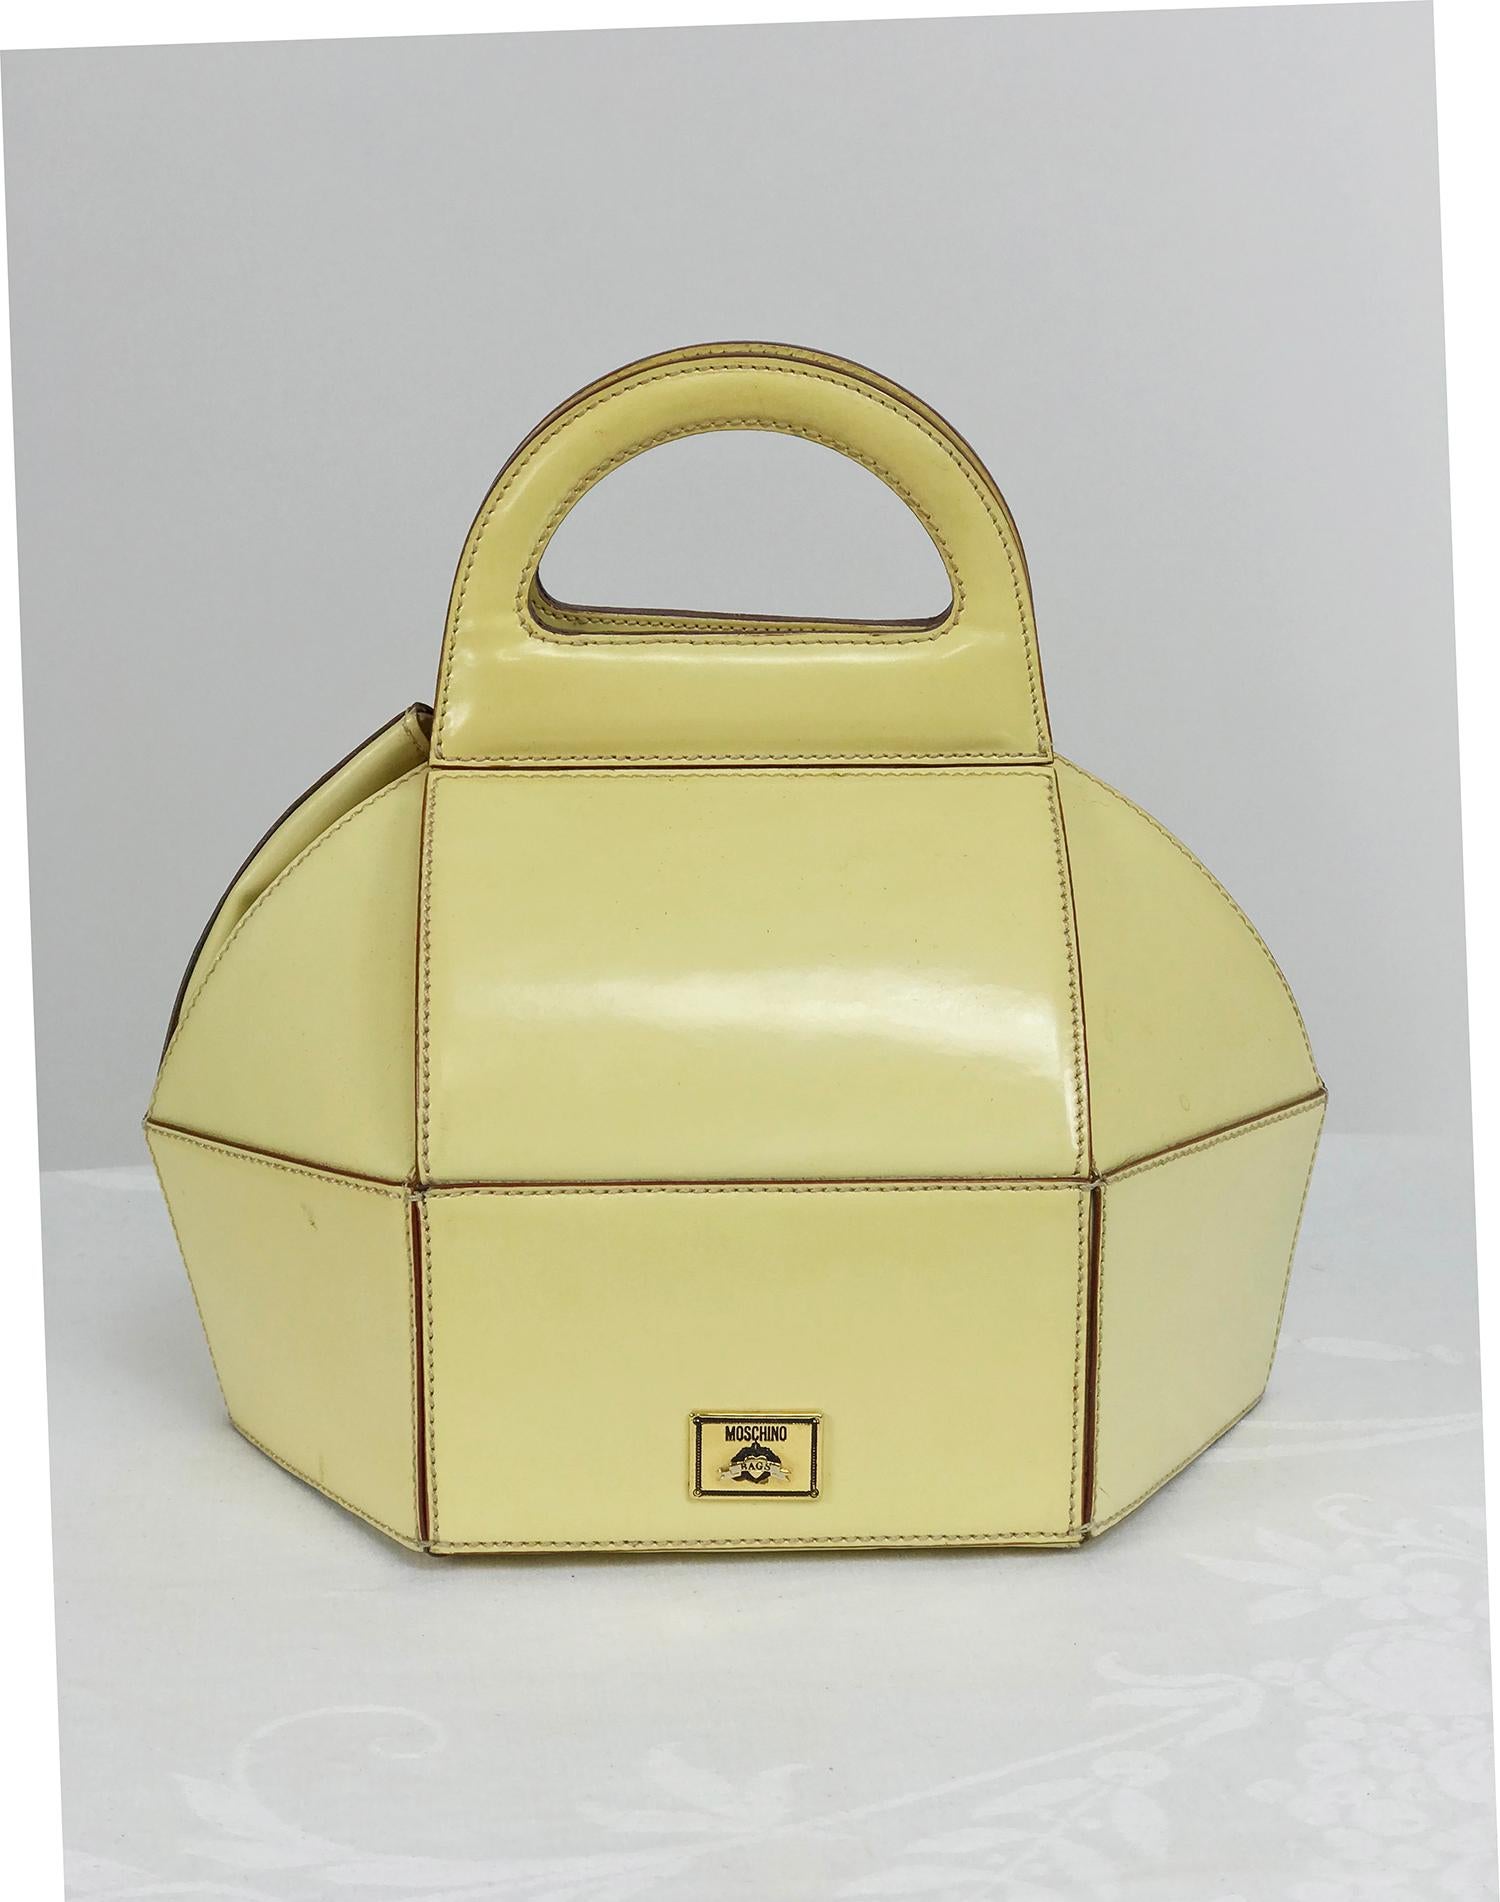 Moschino Pastry Box Glazed Leather Handbag  In Good Condition In West Palm Beach, FL